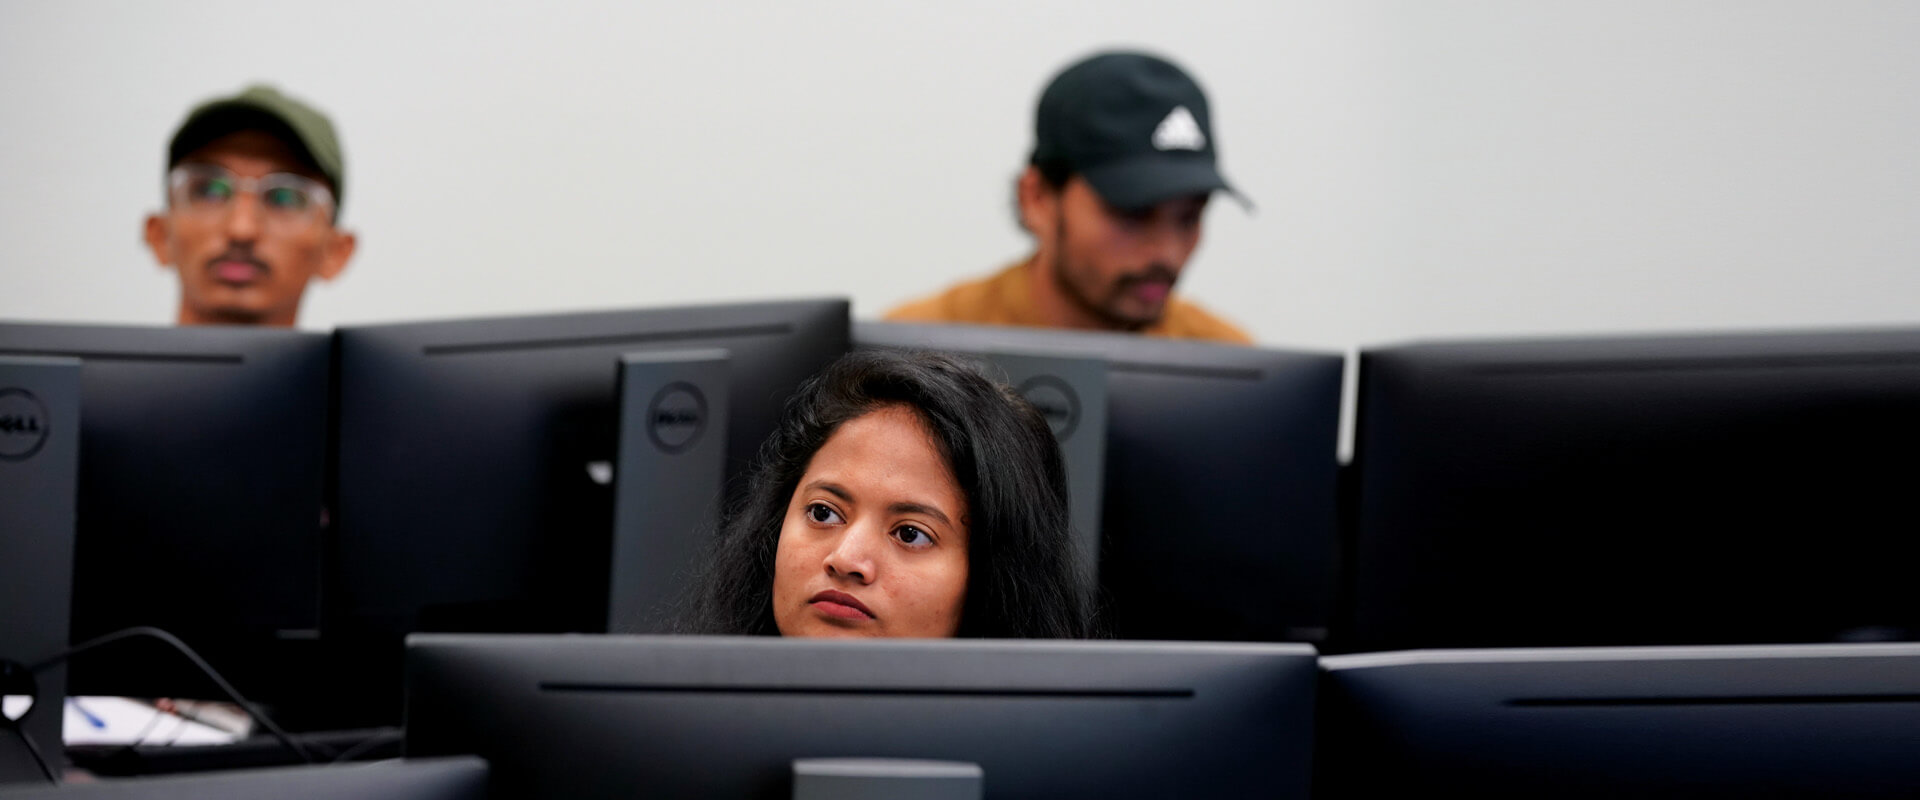 Students listen to a class for their Master of Science in Cybersecurity program.